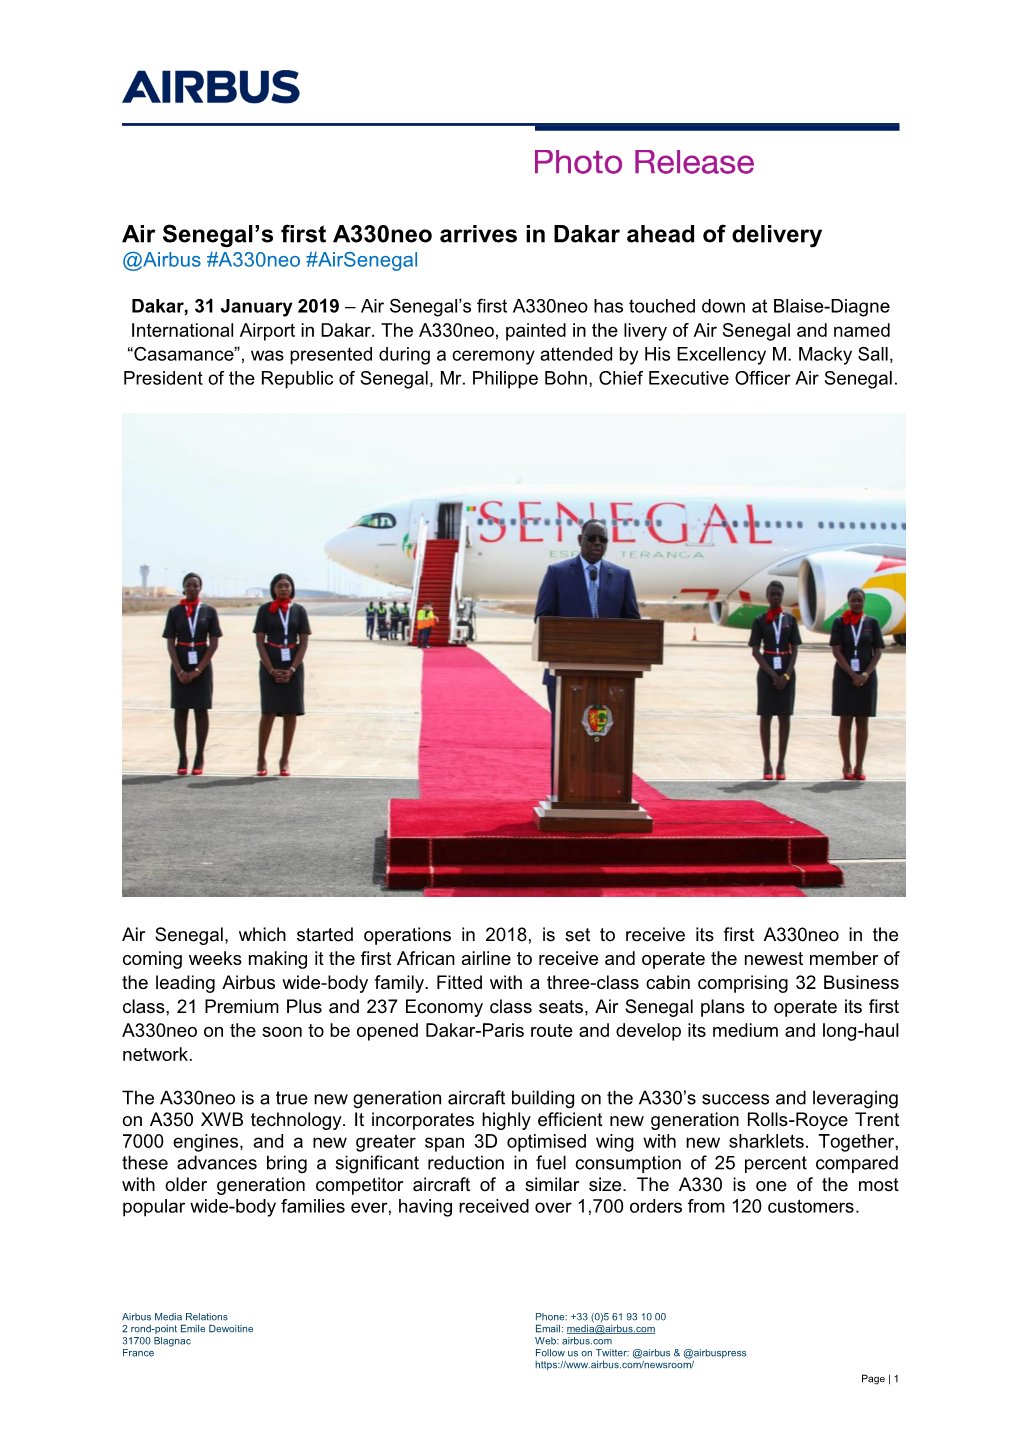 Air Senegal's First A330neo Arrives in Dakar Ahead of Delivery